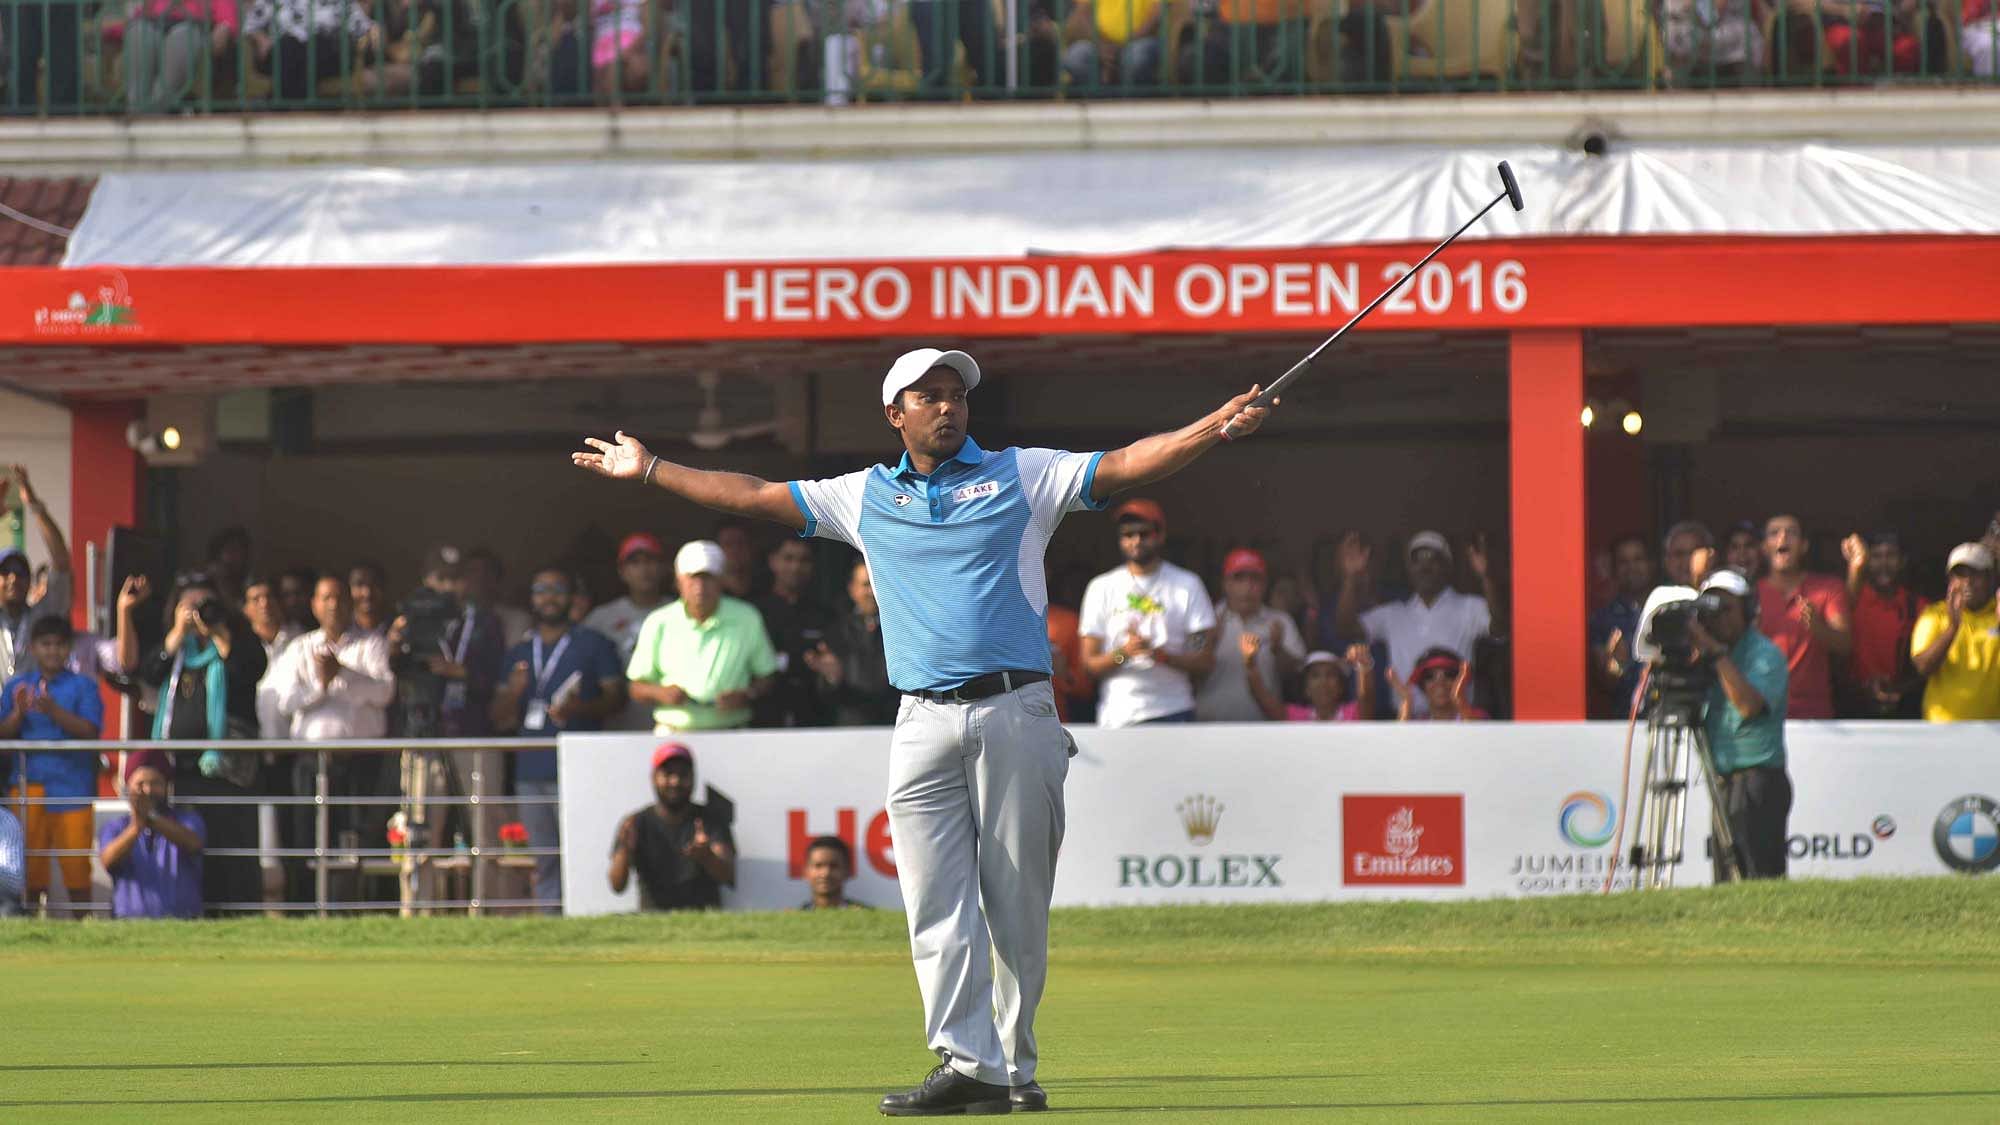 SSP Chawrasia reacts after winning the Indian Open. (Photo: Indian Open)